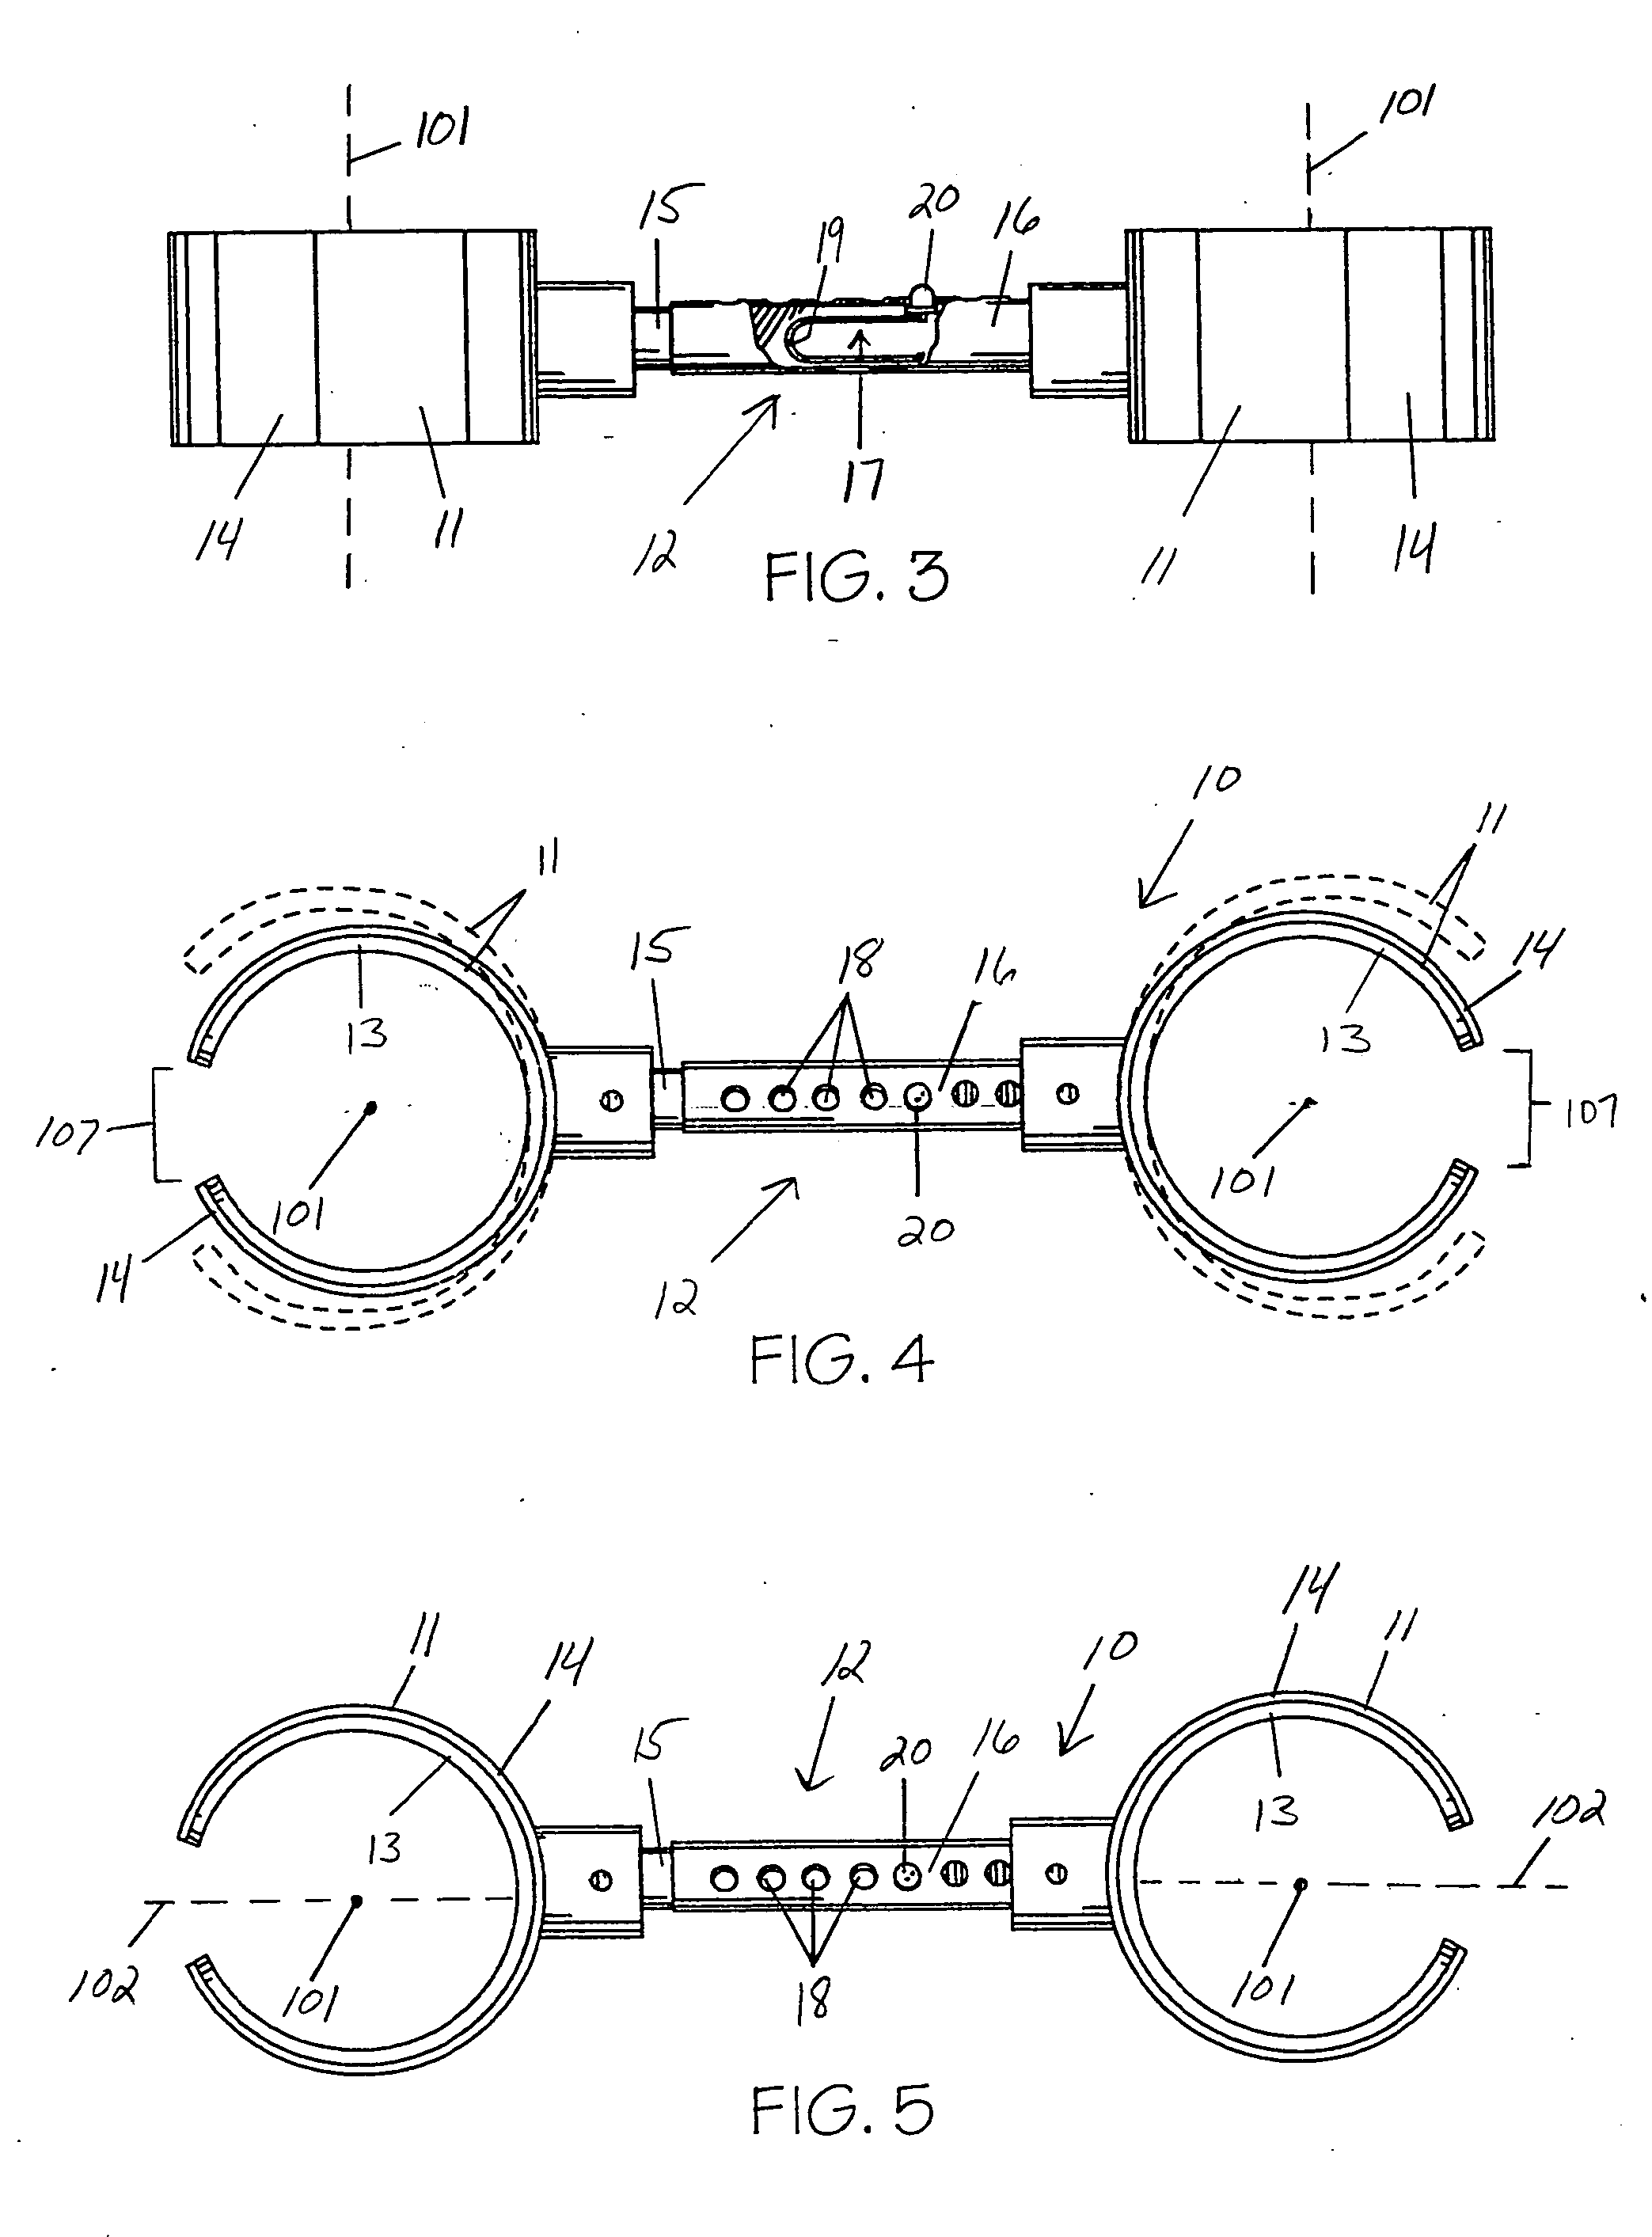 Golf swing connector training device and method